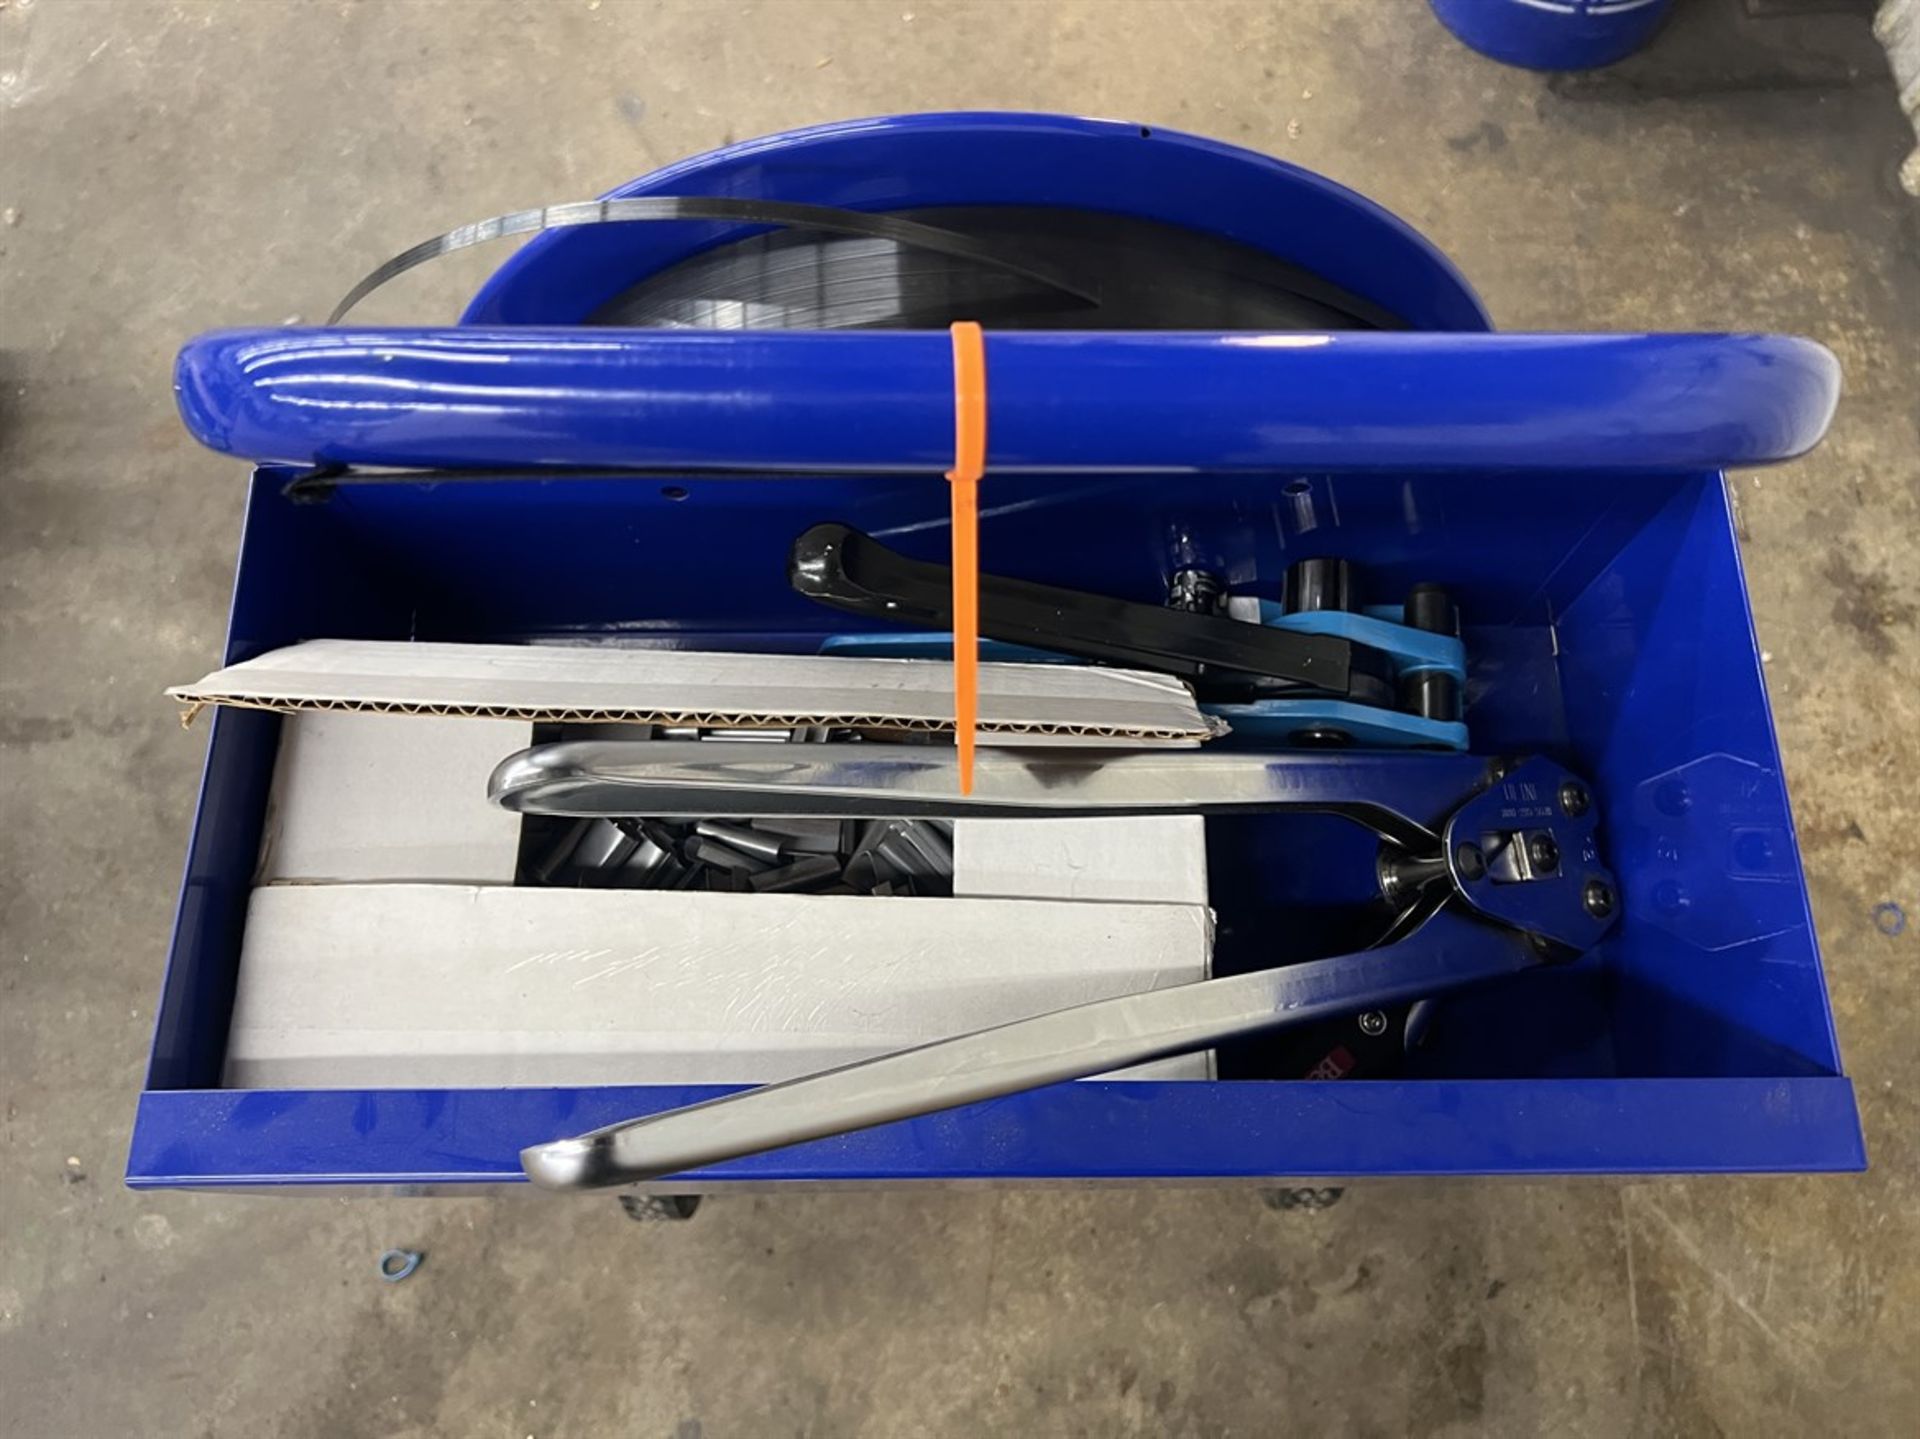 ULINE Banding Cart w/ Tensioner, Clips, and Sealer - Image 3 of 3